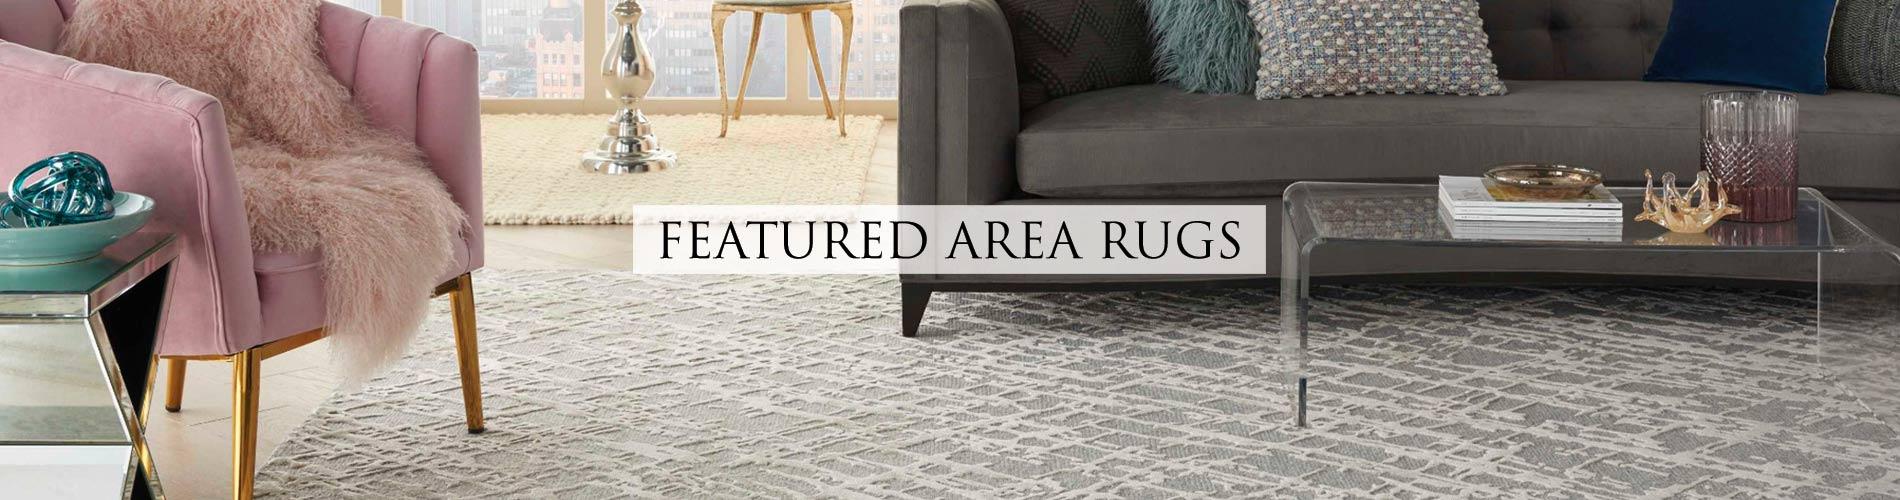 Adding an area rug to a room is a great way give that room a new look, provide warmth and add color. Find a rug that you love and use it as inspiration to decorate the space around it. Area rugs are easy to move from room to room. You can put rugs in different rooms of your home to create fresh looks.